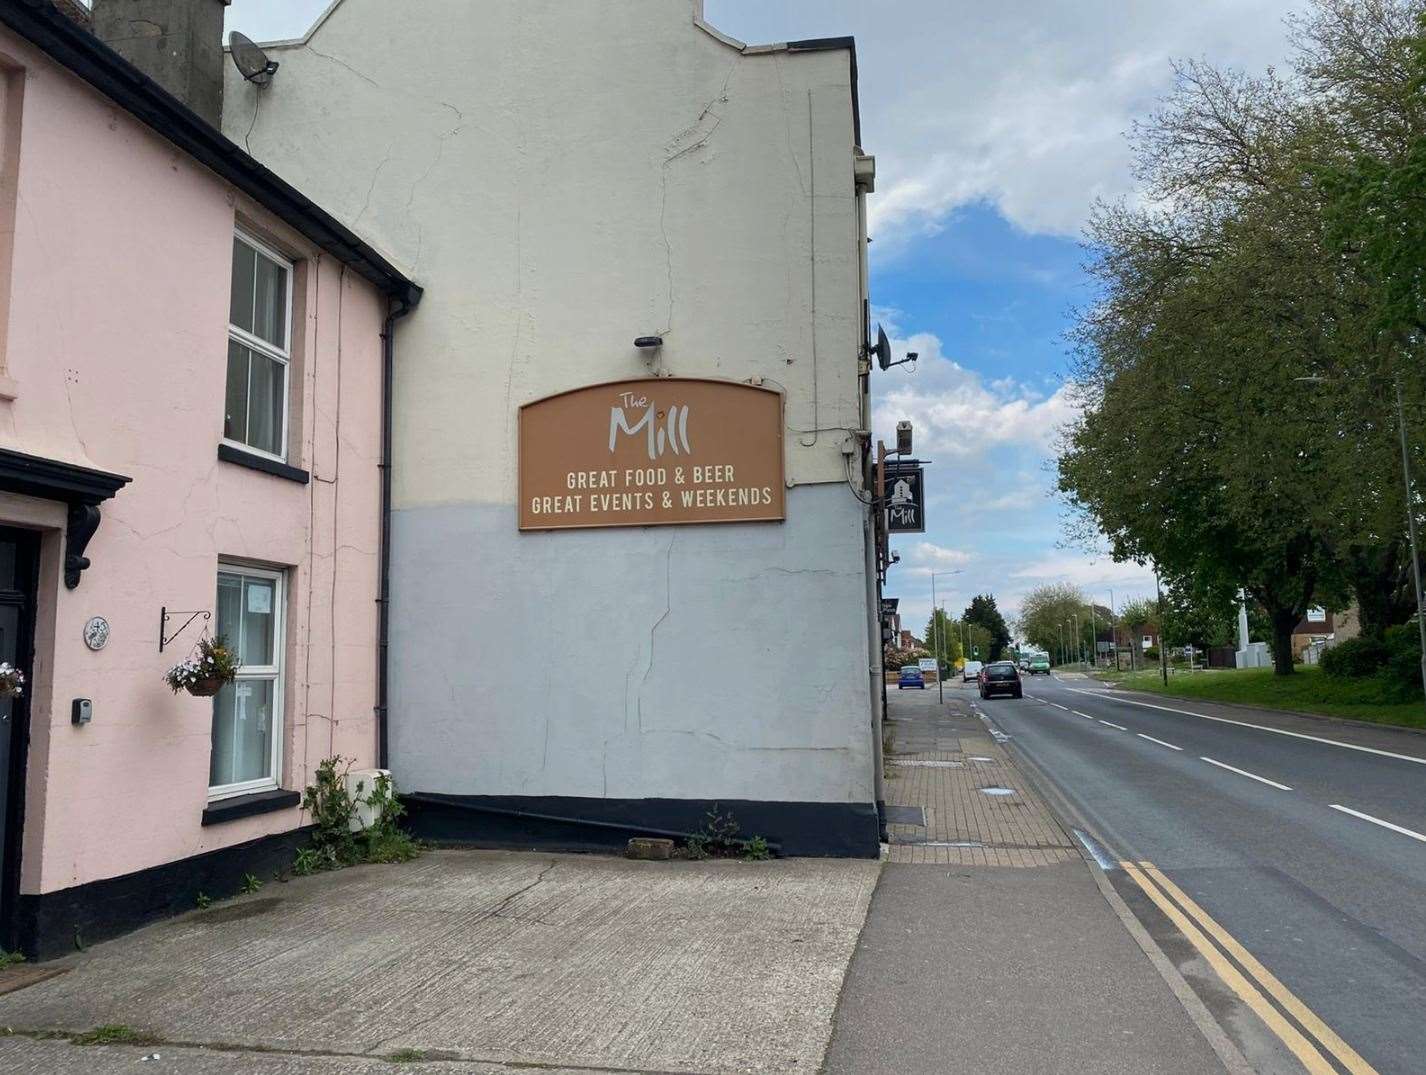 Marcoz Properties & Developments Ltd wants to turn the redundant pub - formerly known as the Waterloo Tavern, Saxby’s and the Run of the Mill - into two flats